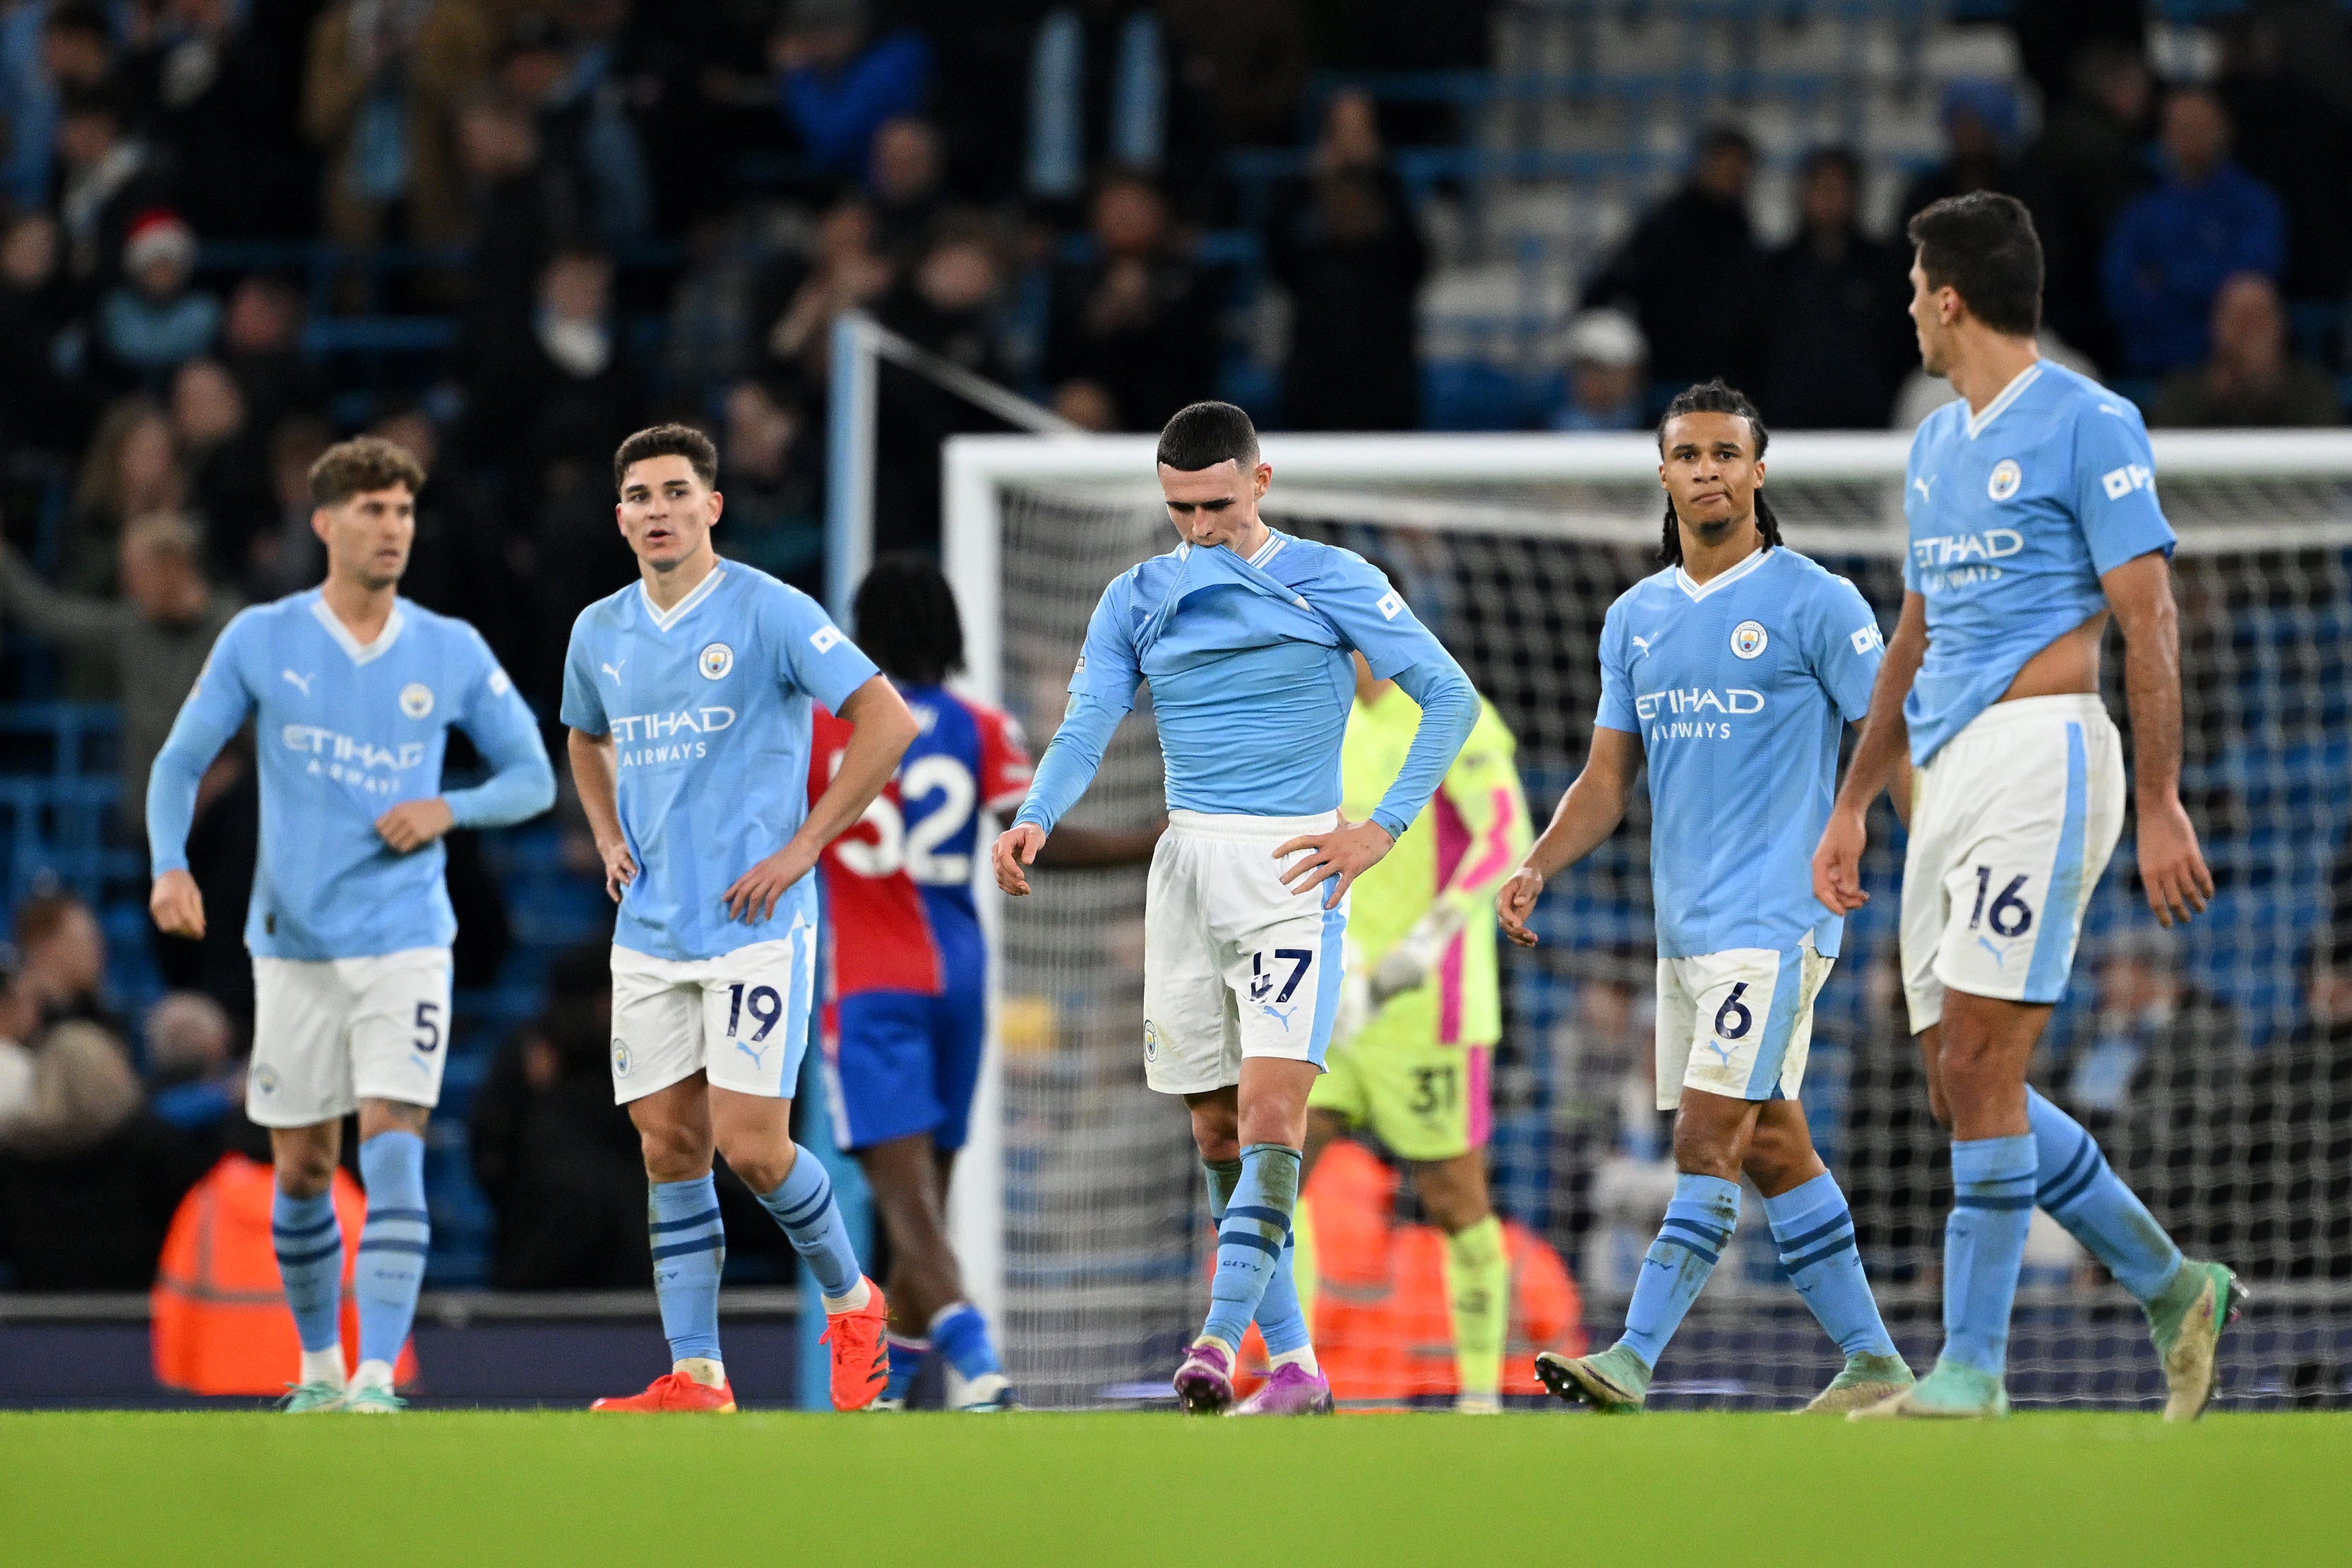 Manchester City are on a poor run of form at the moment